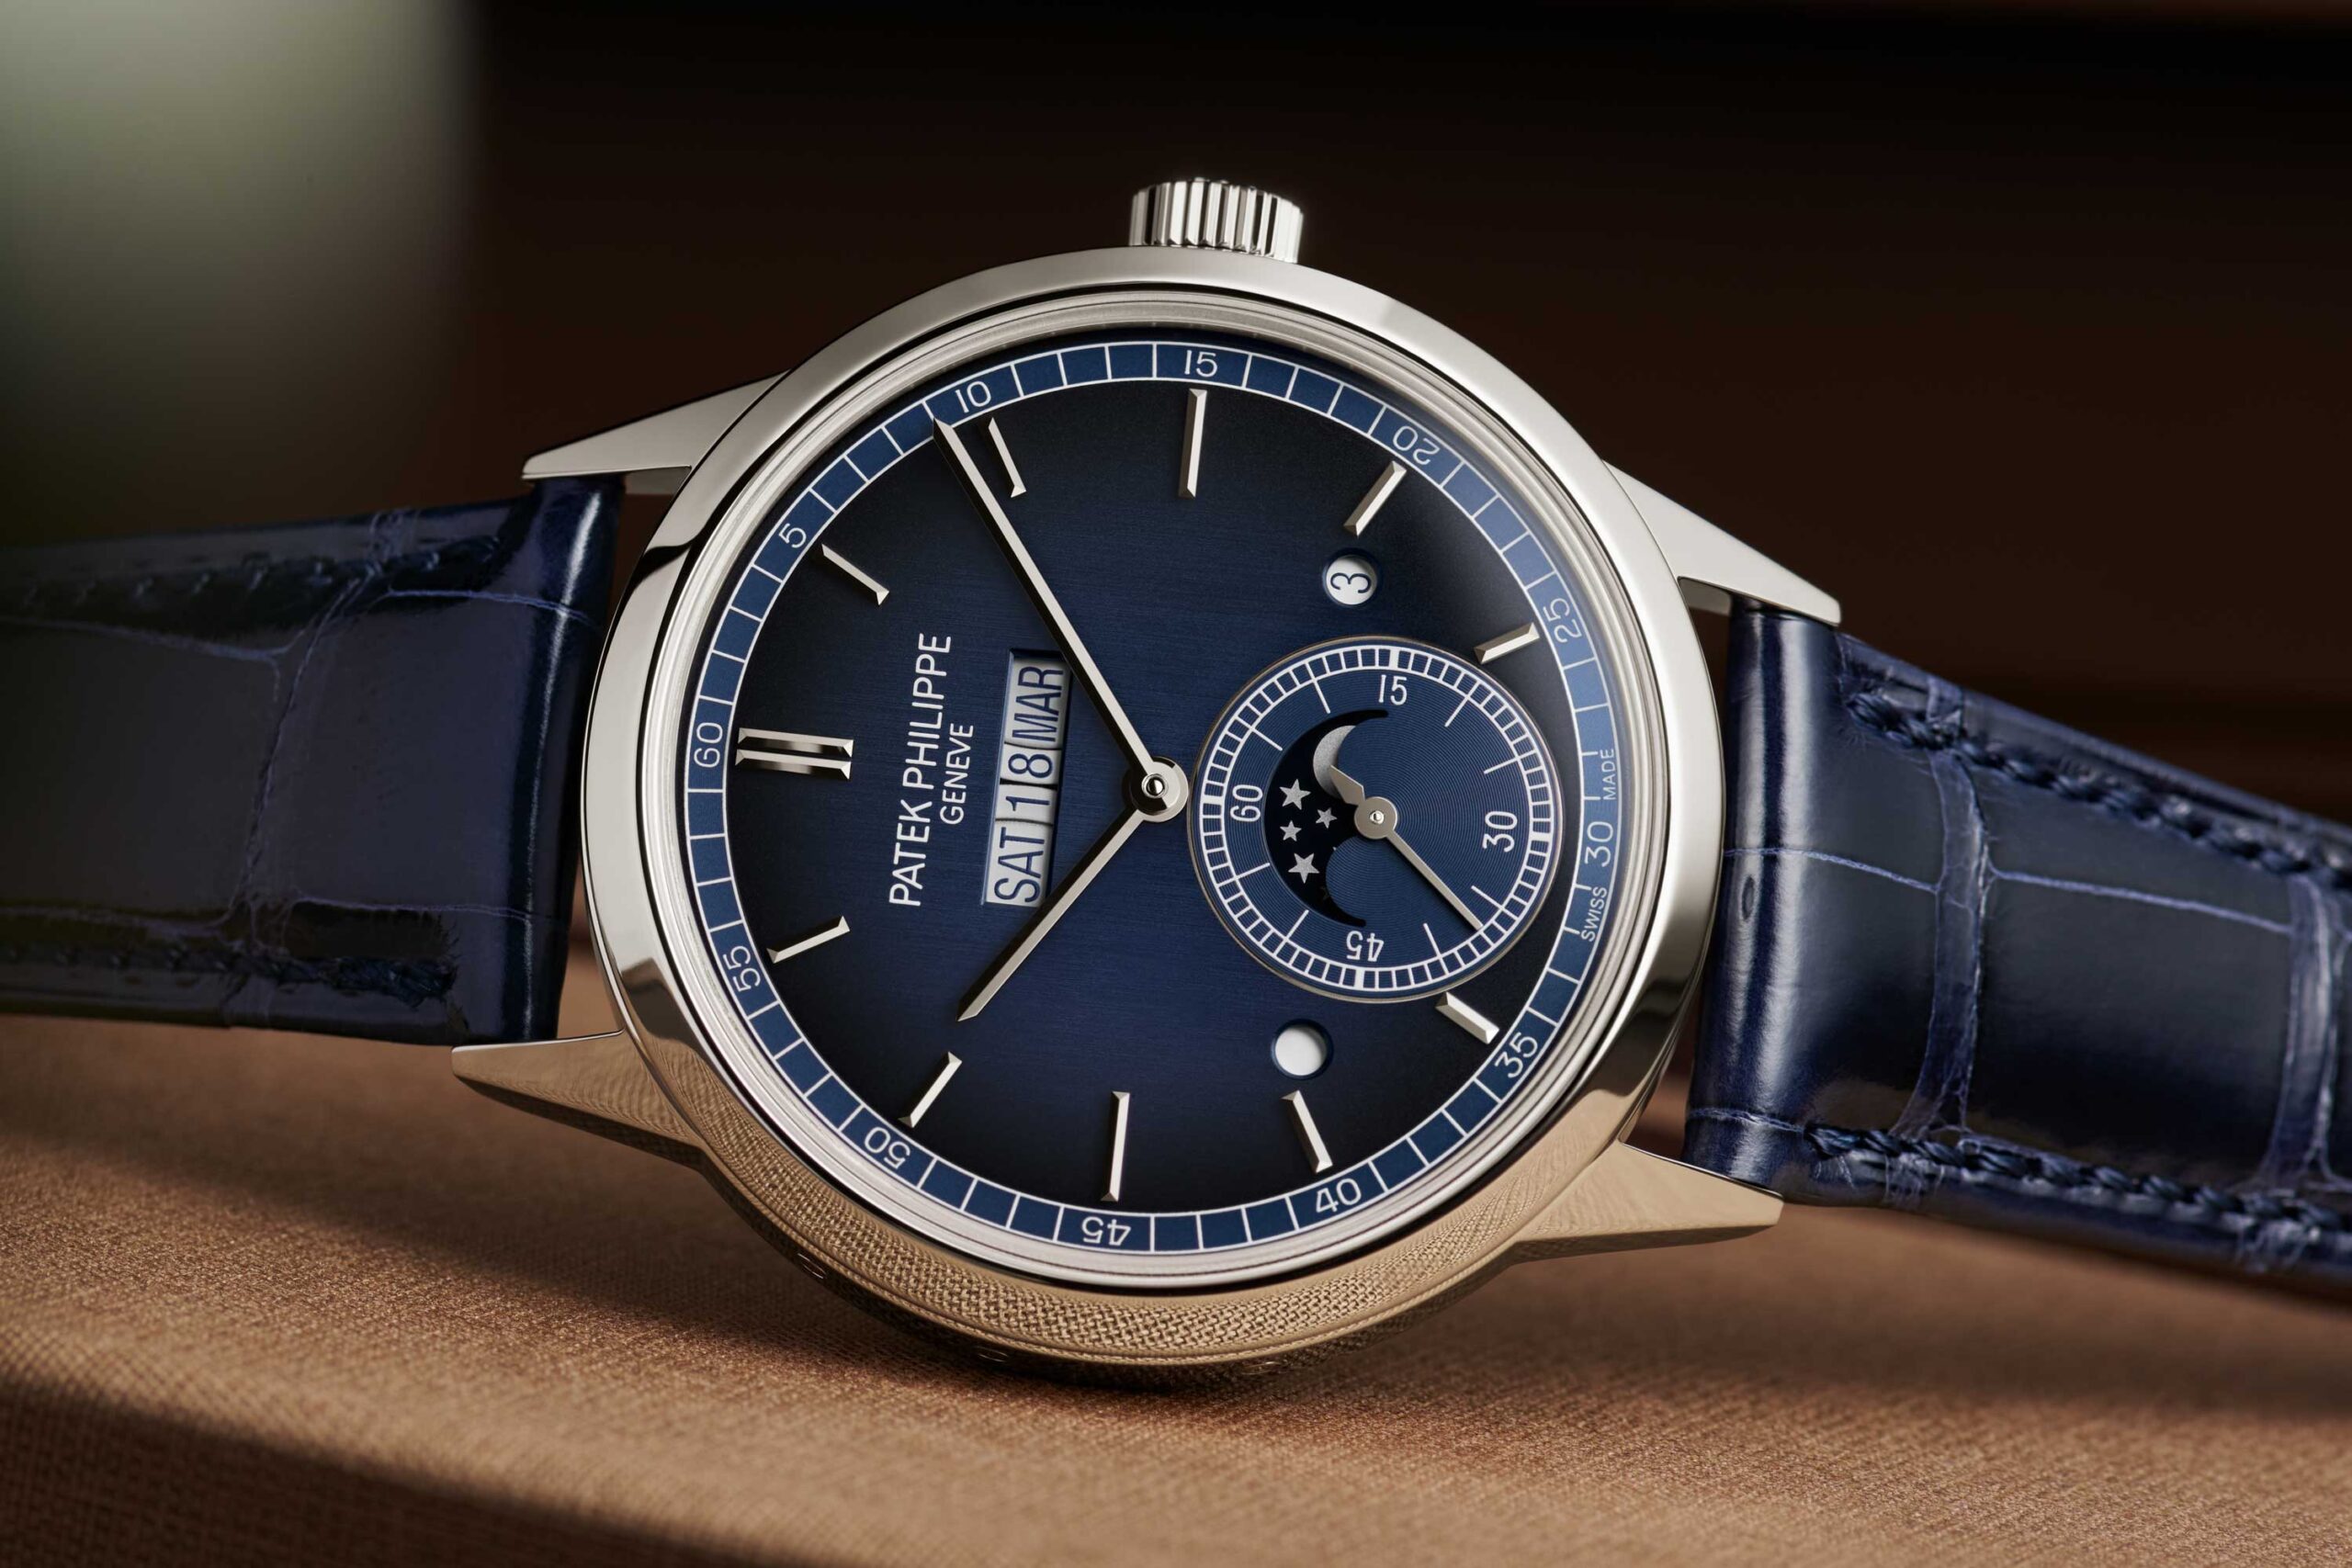 Patek Philippe closes off Watches & Wonders 2021 with an all new perpetual calendar, the Ref. 5236P-001 In-line Perpetual Calendar with a new patented calendar display